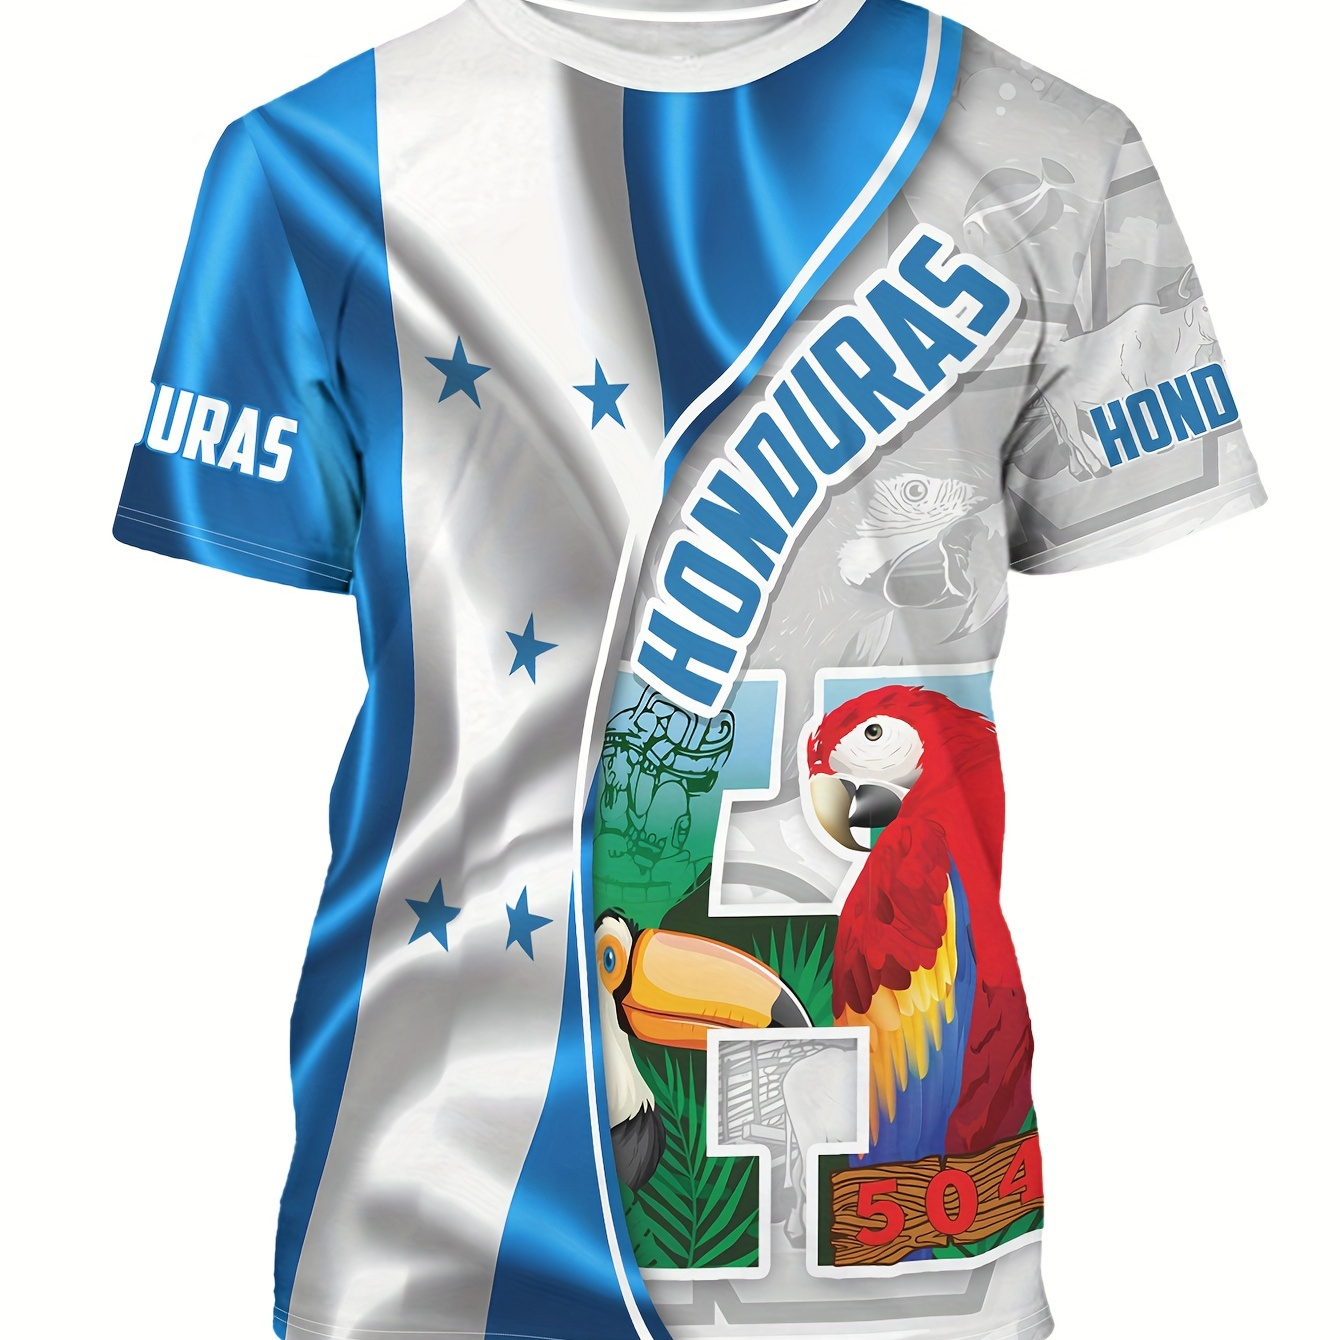 

Honduran Flag Pattern Toucan And Parrot Print Crew Neck And Short Sleeve T-shirt, Chic And Stylish Tops For Men's Summer Outdoors And Holiday Wear